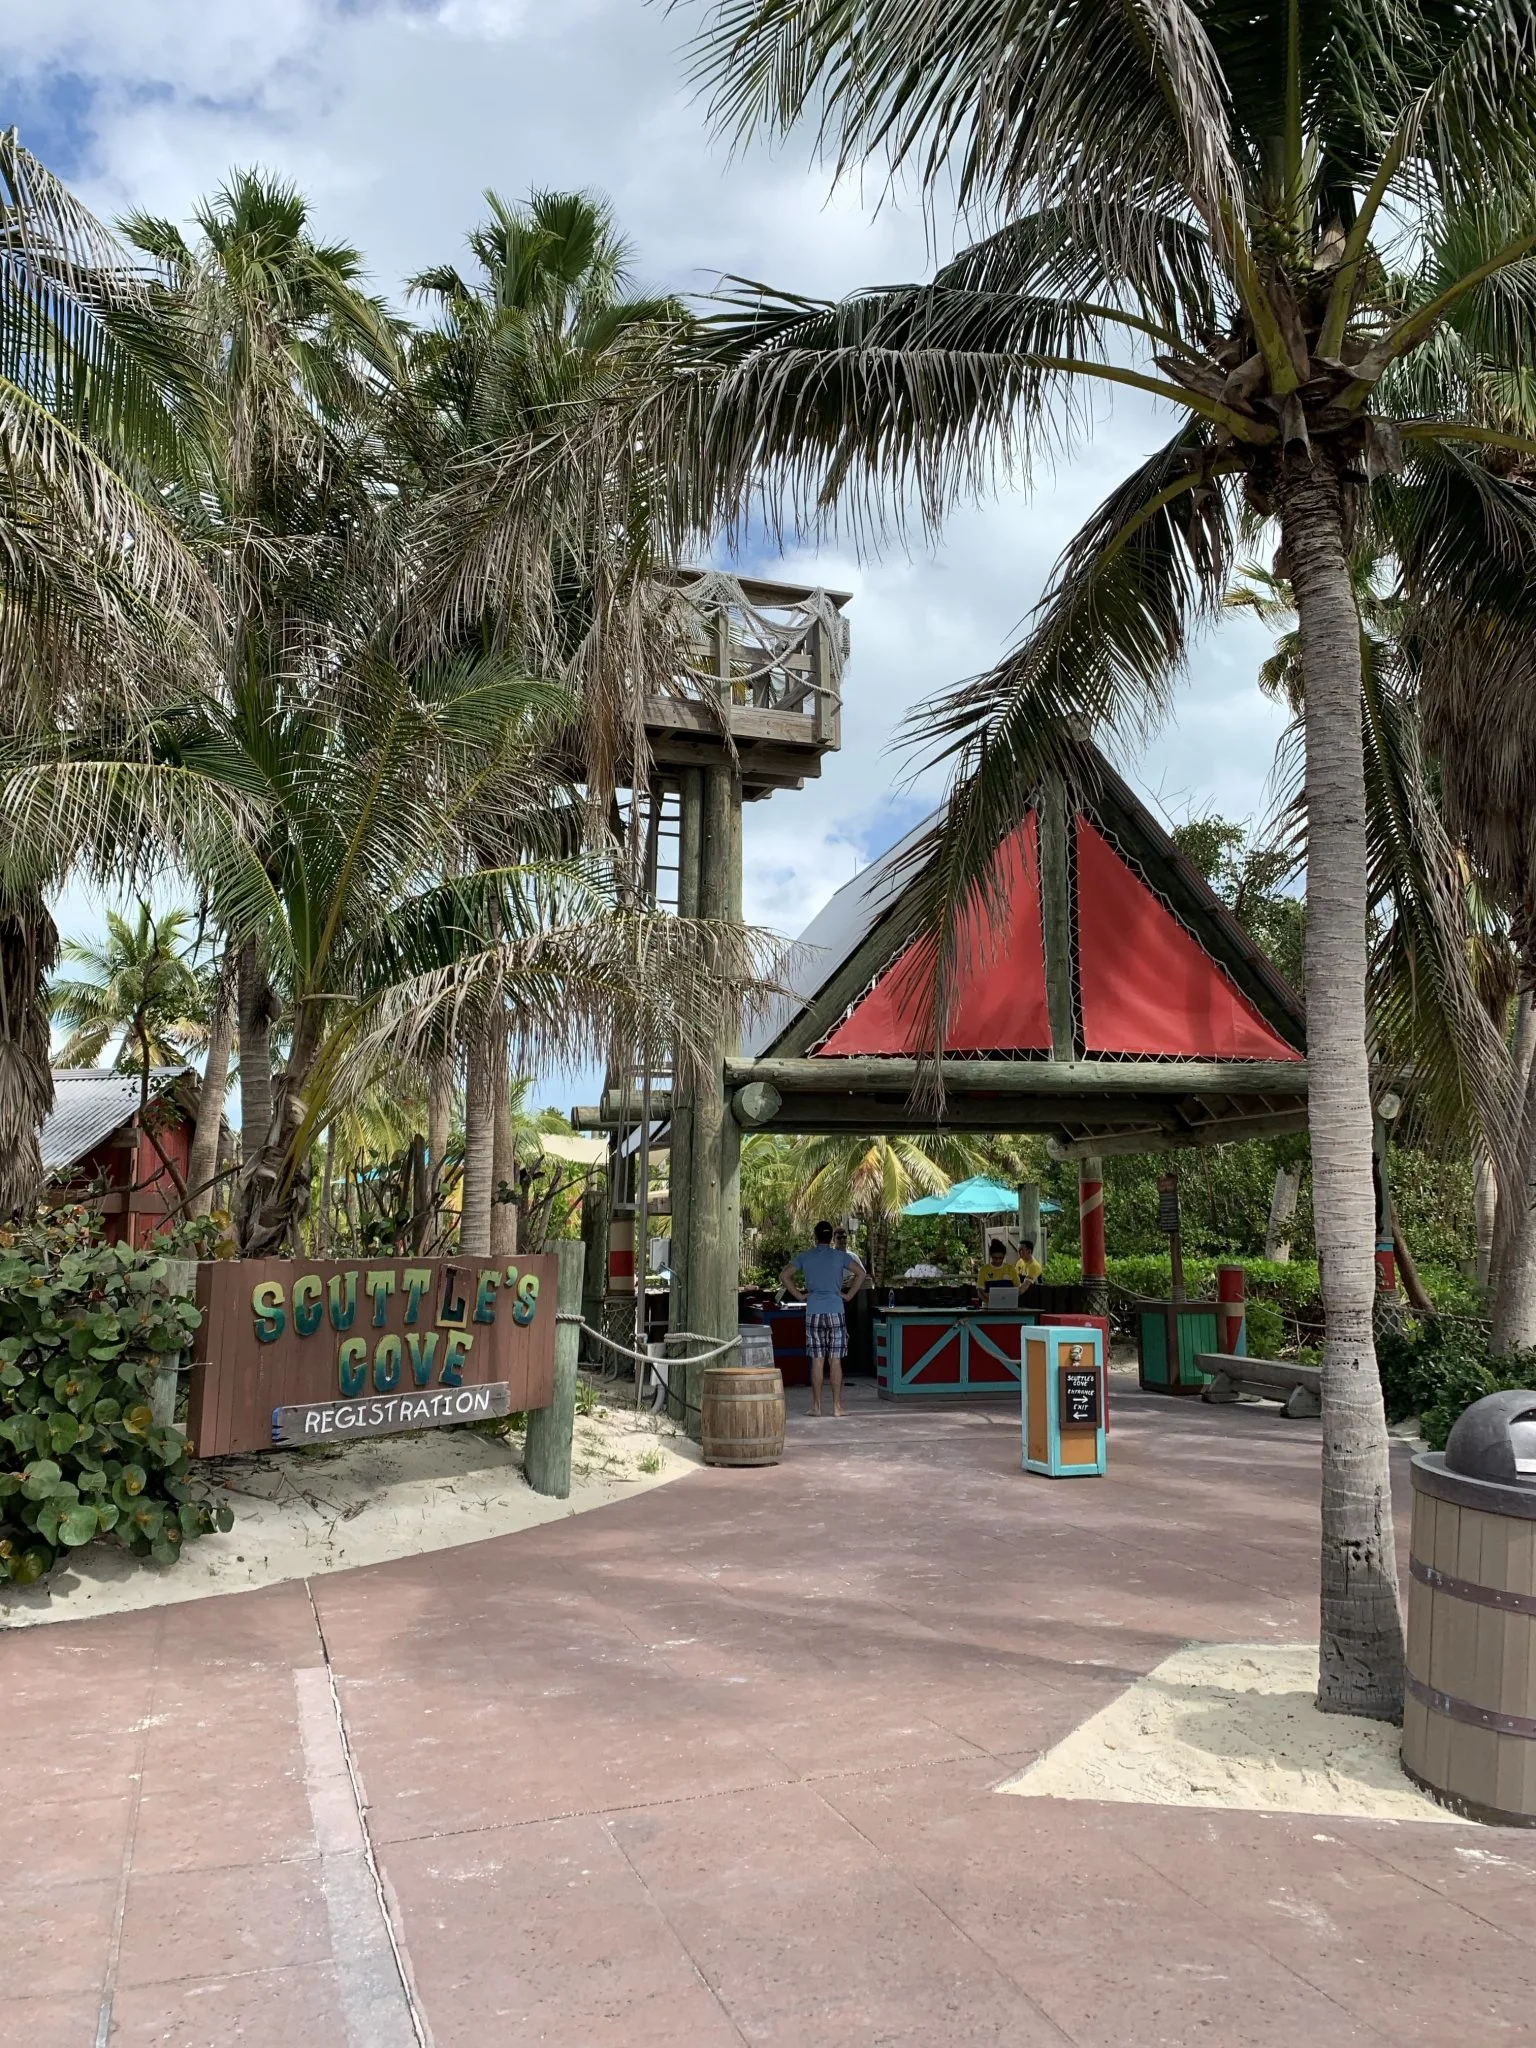 Castaway Cay Activities: a Complete Guide to Beaches and Events featured by top US Disney blogger, Marcie and the Mouse: Scuttle's Cove kids club regstration at Castaway Cay